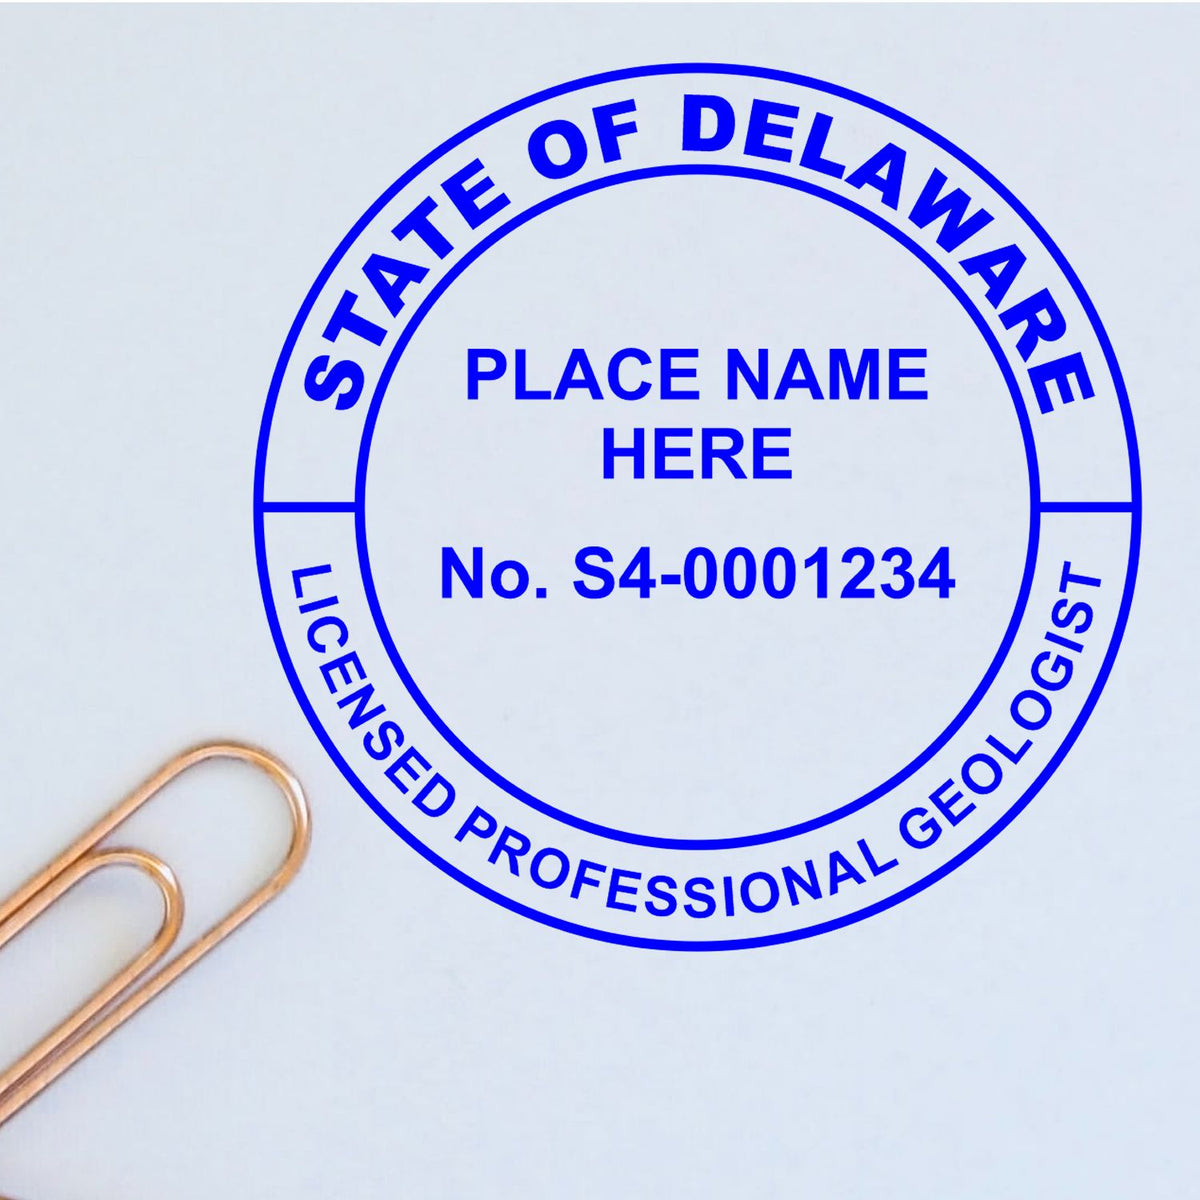 Another Example of a stamped impression of the Premium MaxLight Pre-Inked Delaware Geology Stamp on a office form